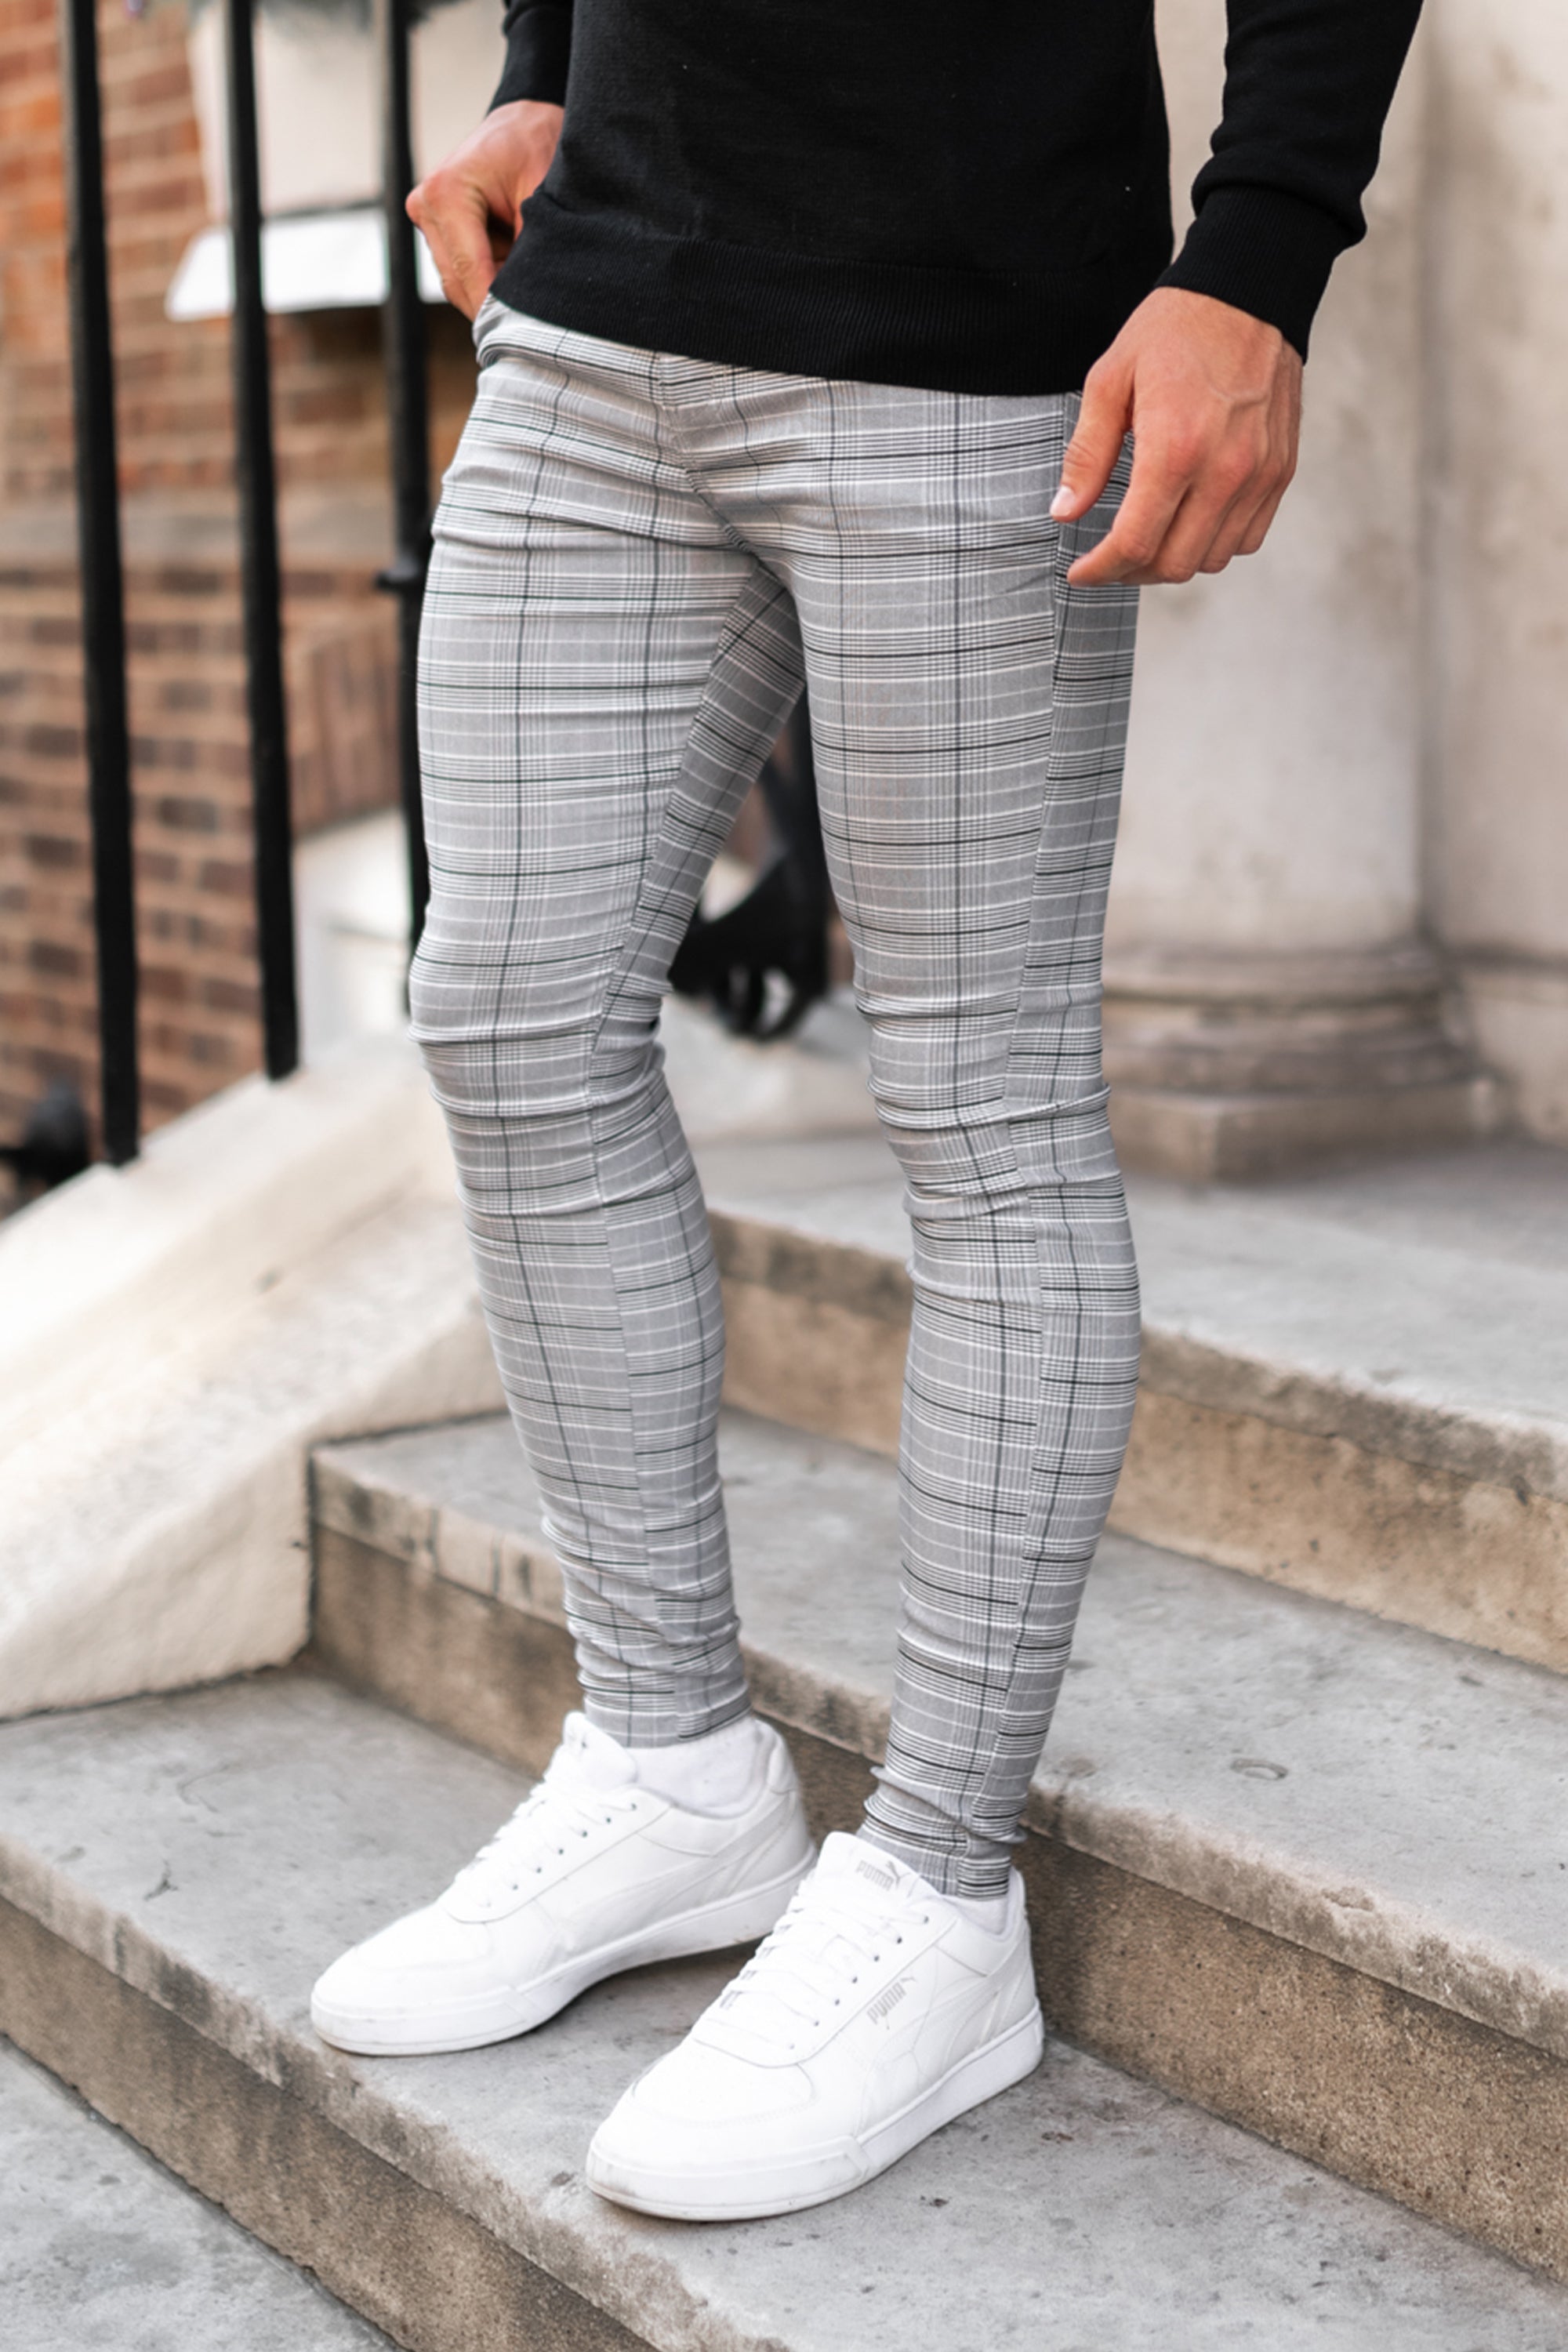 THE PLATA TROUSERS - GREY